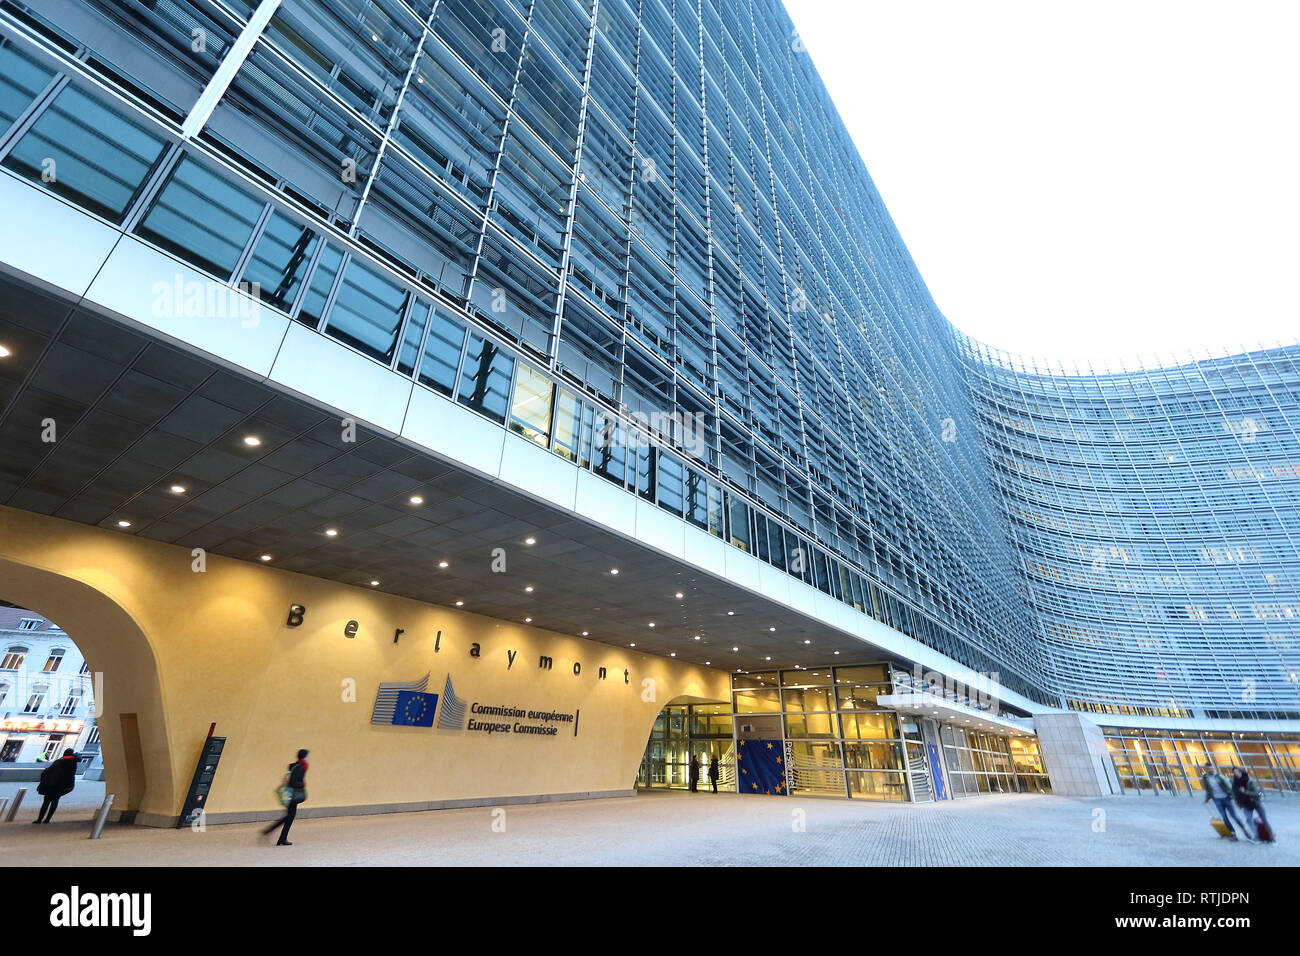 Brussels Berlaymont Building, Headquarters of the European Commission, City of Brussels, Belgium, 01 March 2019, Photo by Richard Goldschmidt Stock Photo